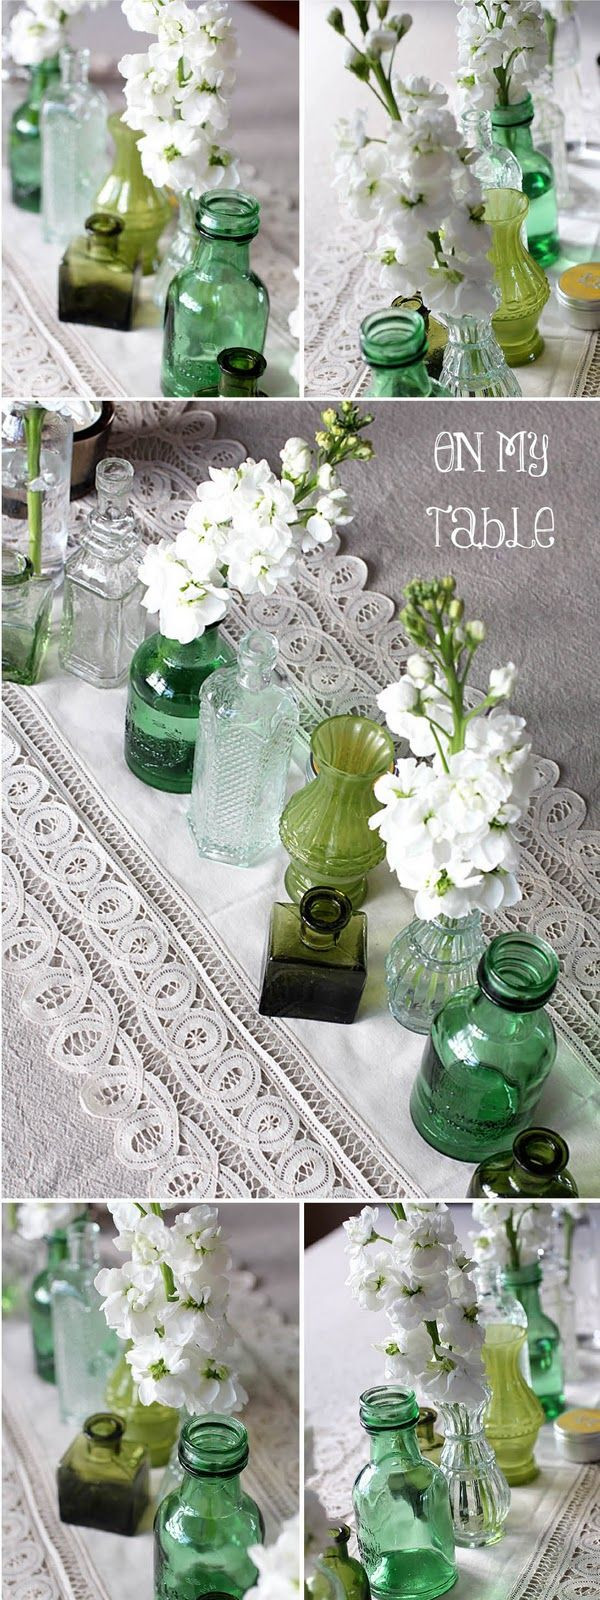 27 Recommended wholesale Vases atlanta Ga 2024 free download wholesale vases atlanta ga of 232 best wedding images on pinterest creative ideas decorating within different shades of green glass with white flowers